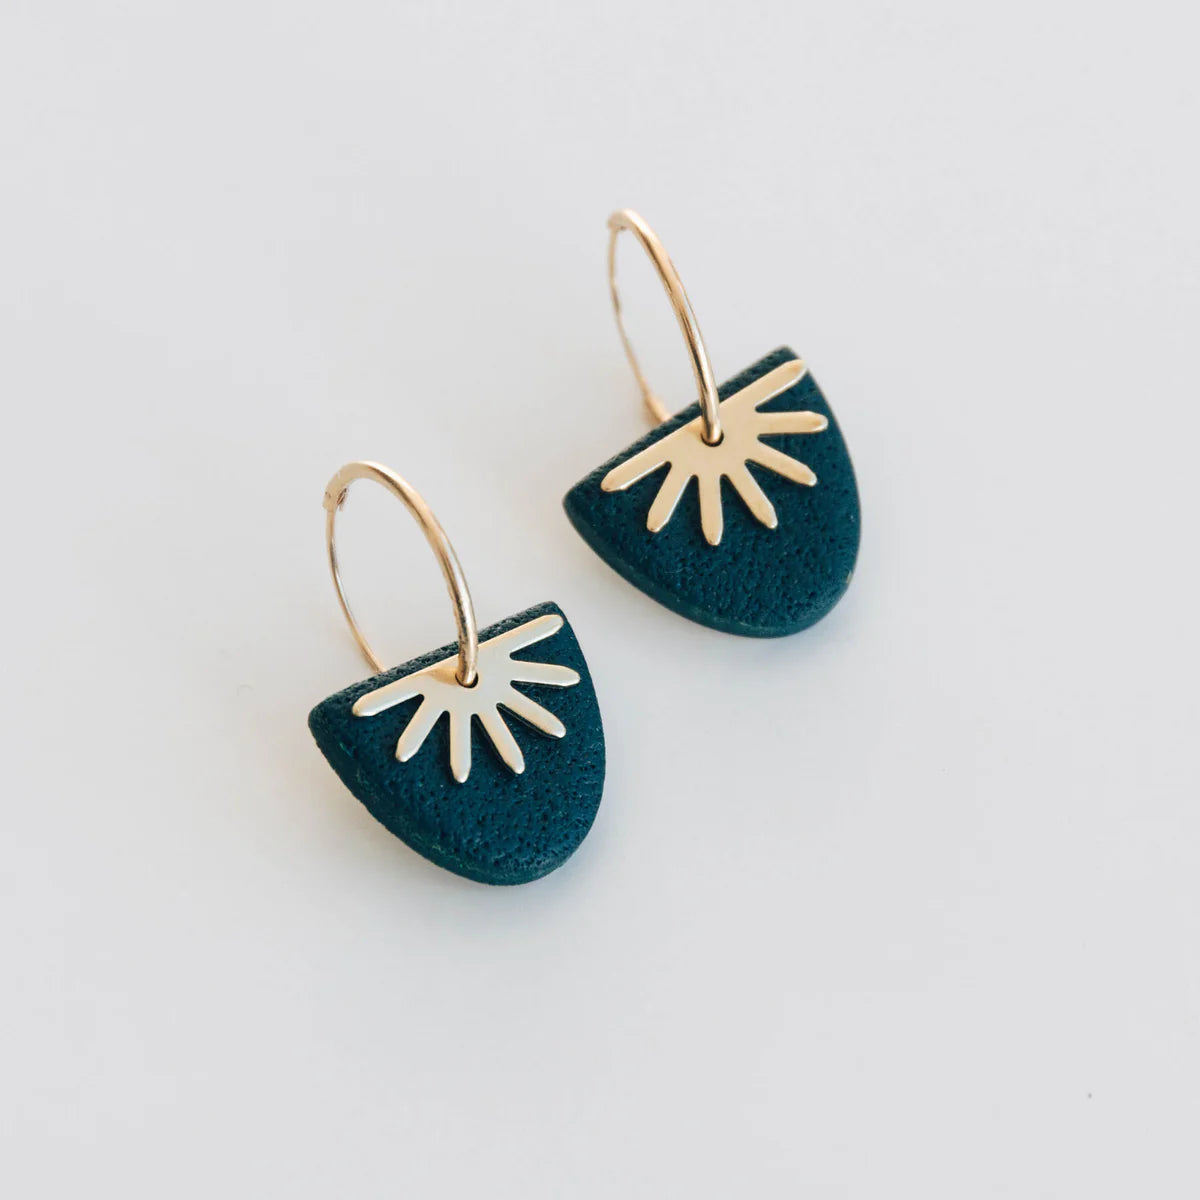 Sun ray hoops in teal - The Bristol Artisan Handmade Sustainable Gifts and Homewares.